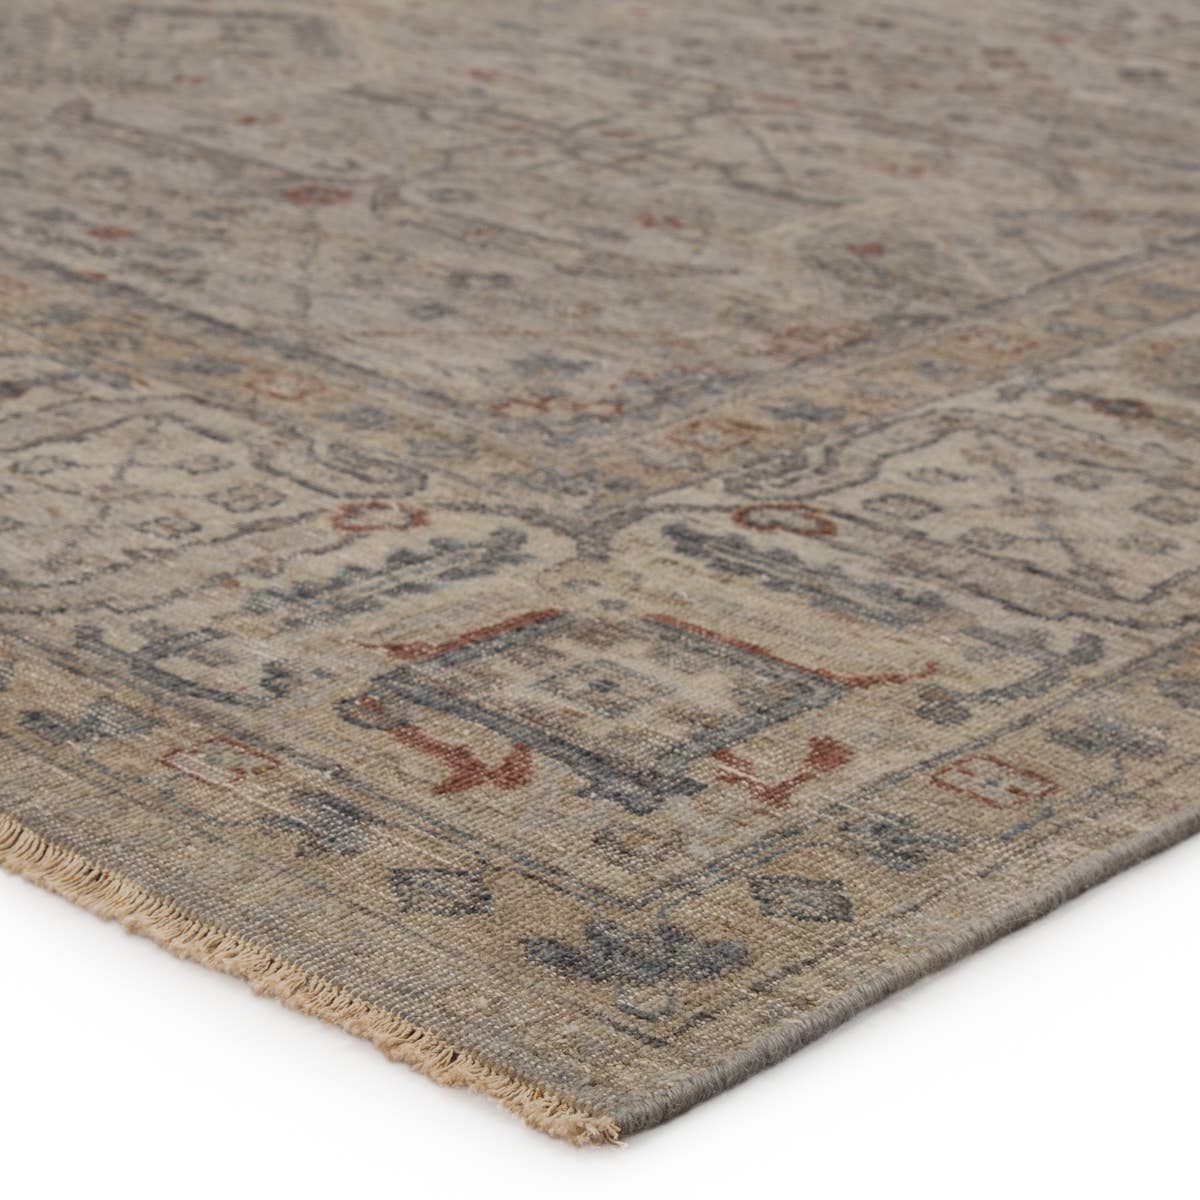 The Tierzah Maison Area Rug by Jaipur Living, or TRZ04, boasts a Persian knot construction and neutral beige, taupe, and gray palette with rich hints of terracotta. This artisan-made rug features fringe trimmed details for a touch of global charm. This is perfect for your bedroom or other medium traffic area. 